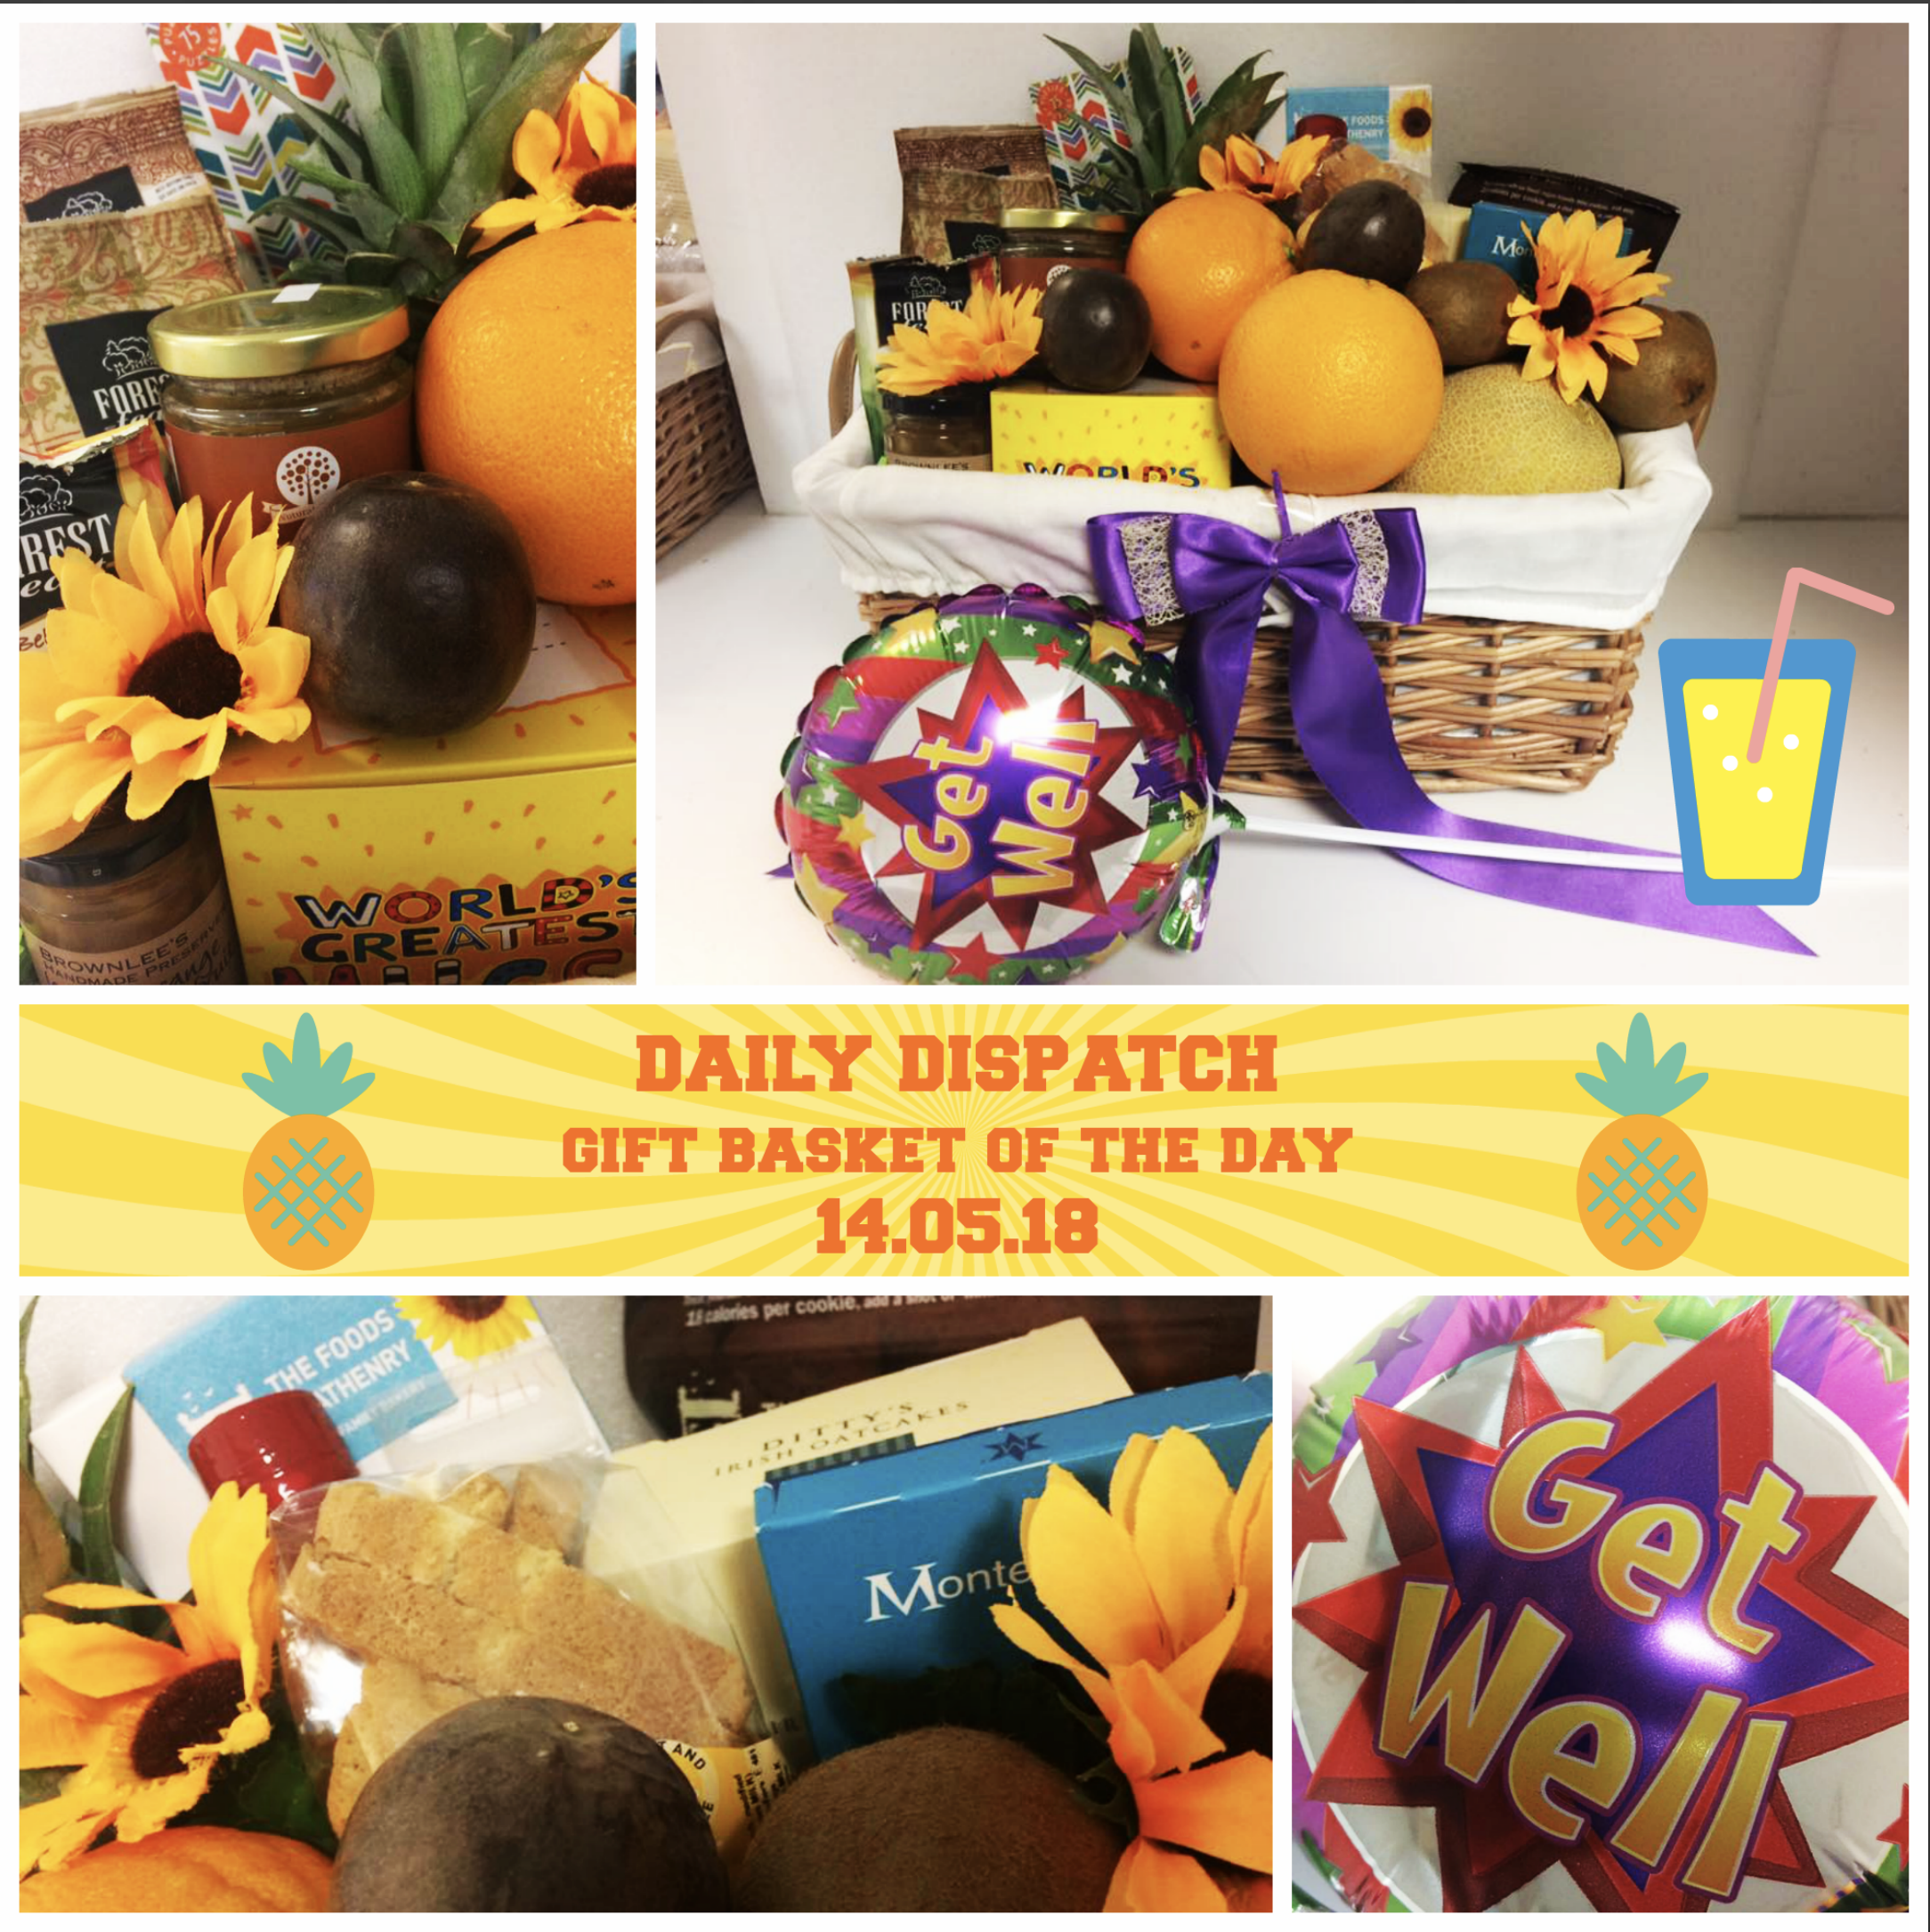 Baskets Galore's Customer Gifts - Gift Basket of the Day 14.05.18